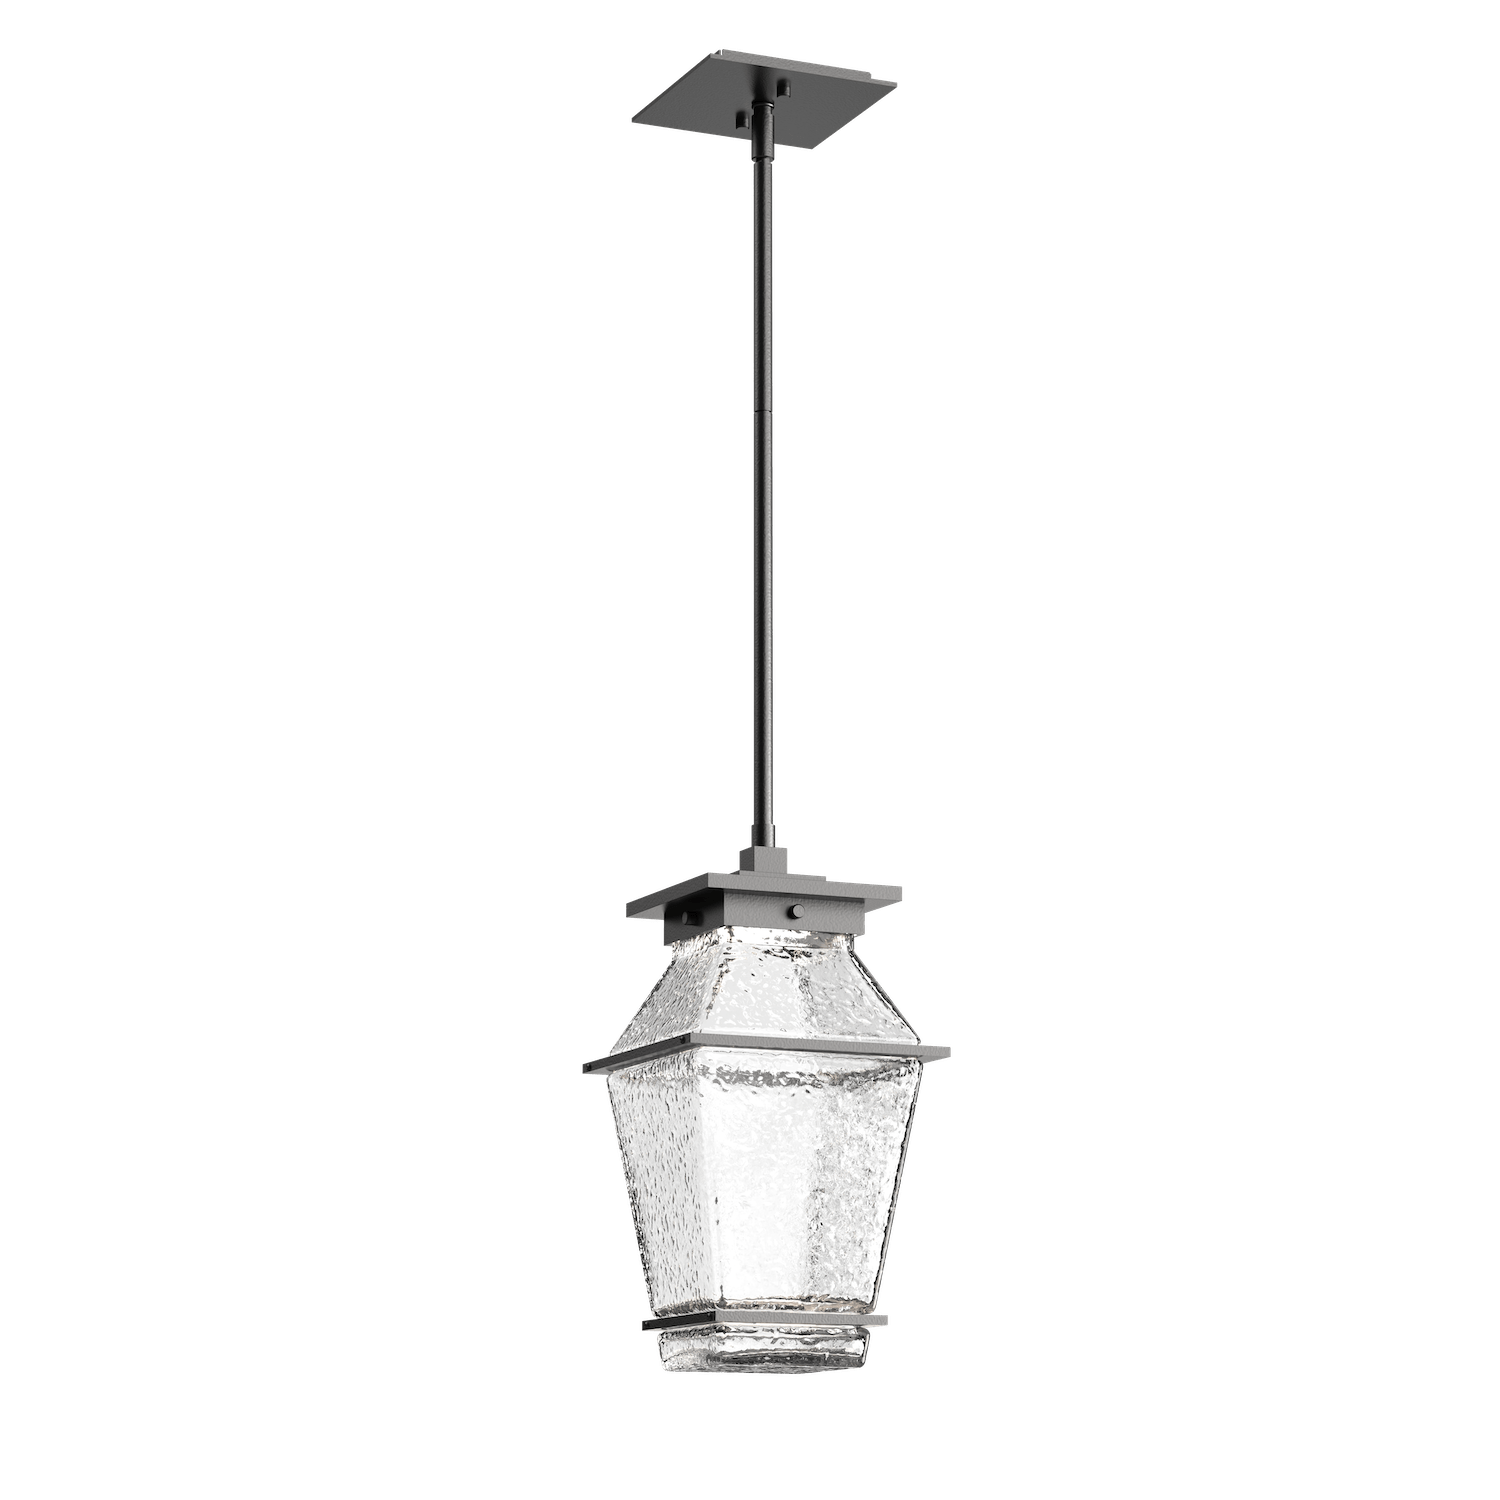 OPB0077-01-AG-C-Hammerton-Studio-Landmark-16-inch-outdoor-pendant-light-with-argento-grey-finish-and-clear-blown-glass-shades-and-LED-lamping